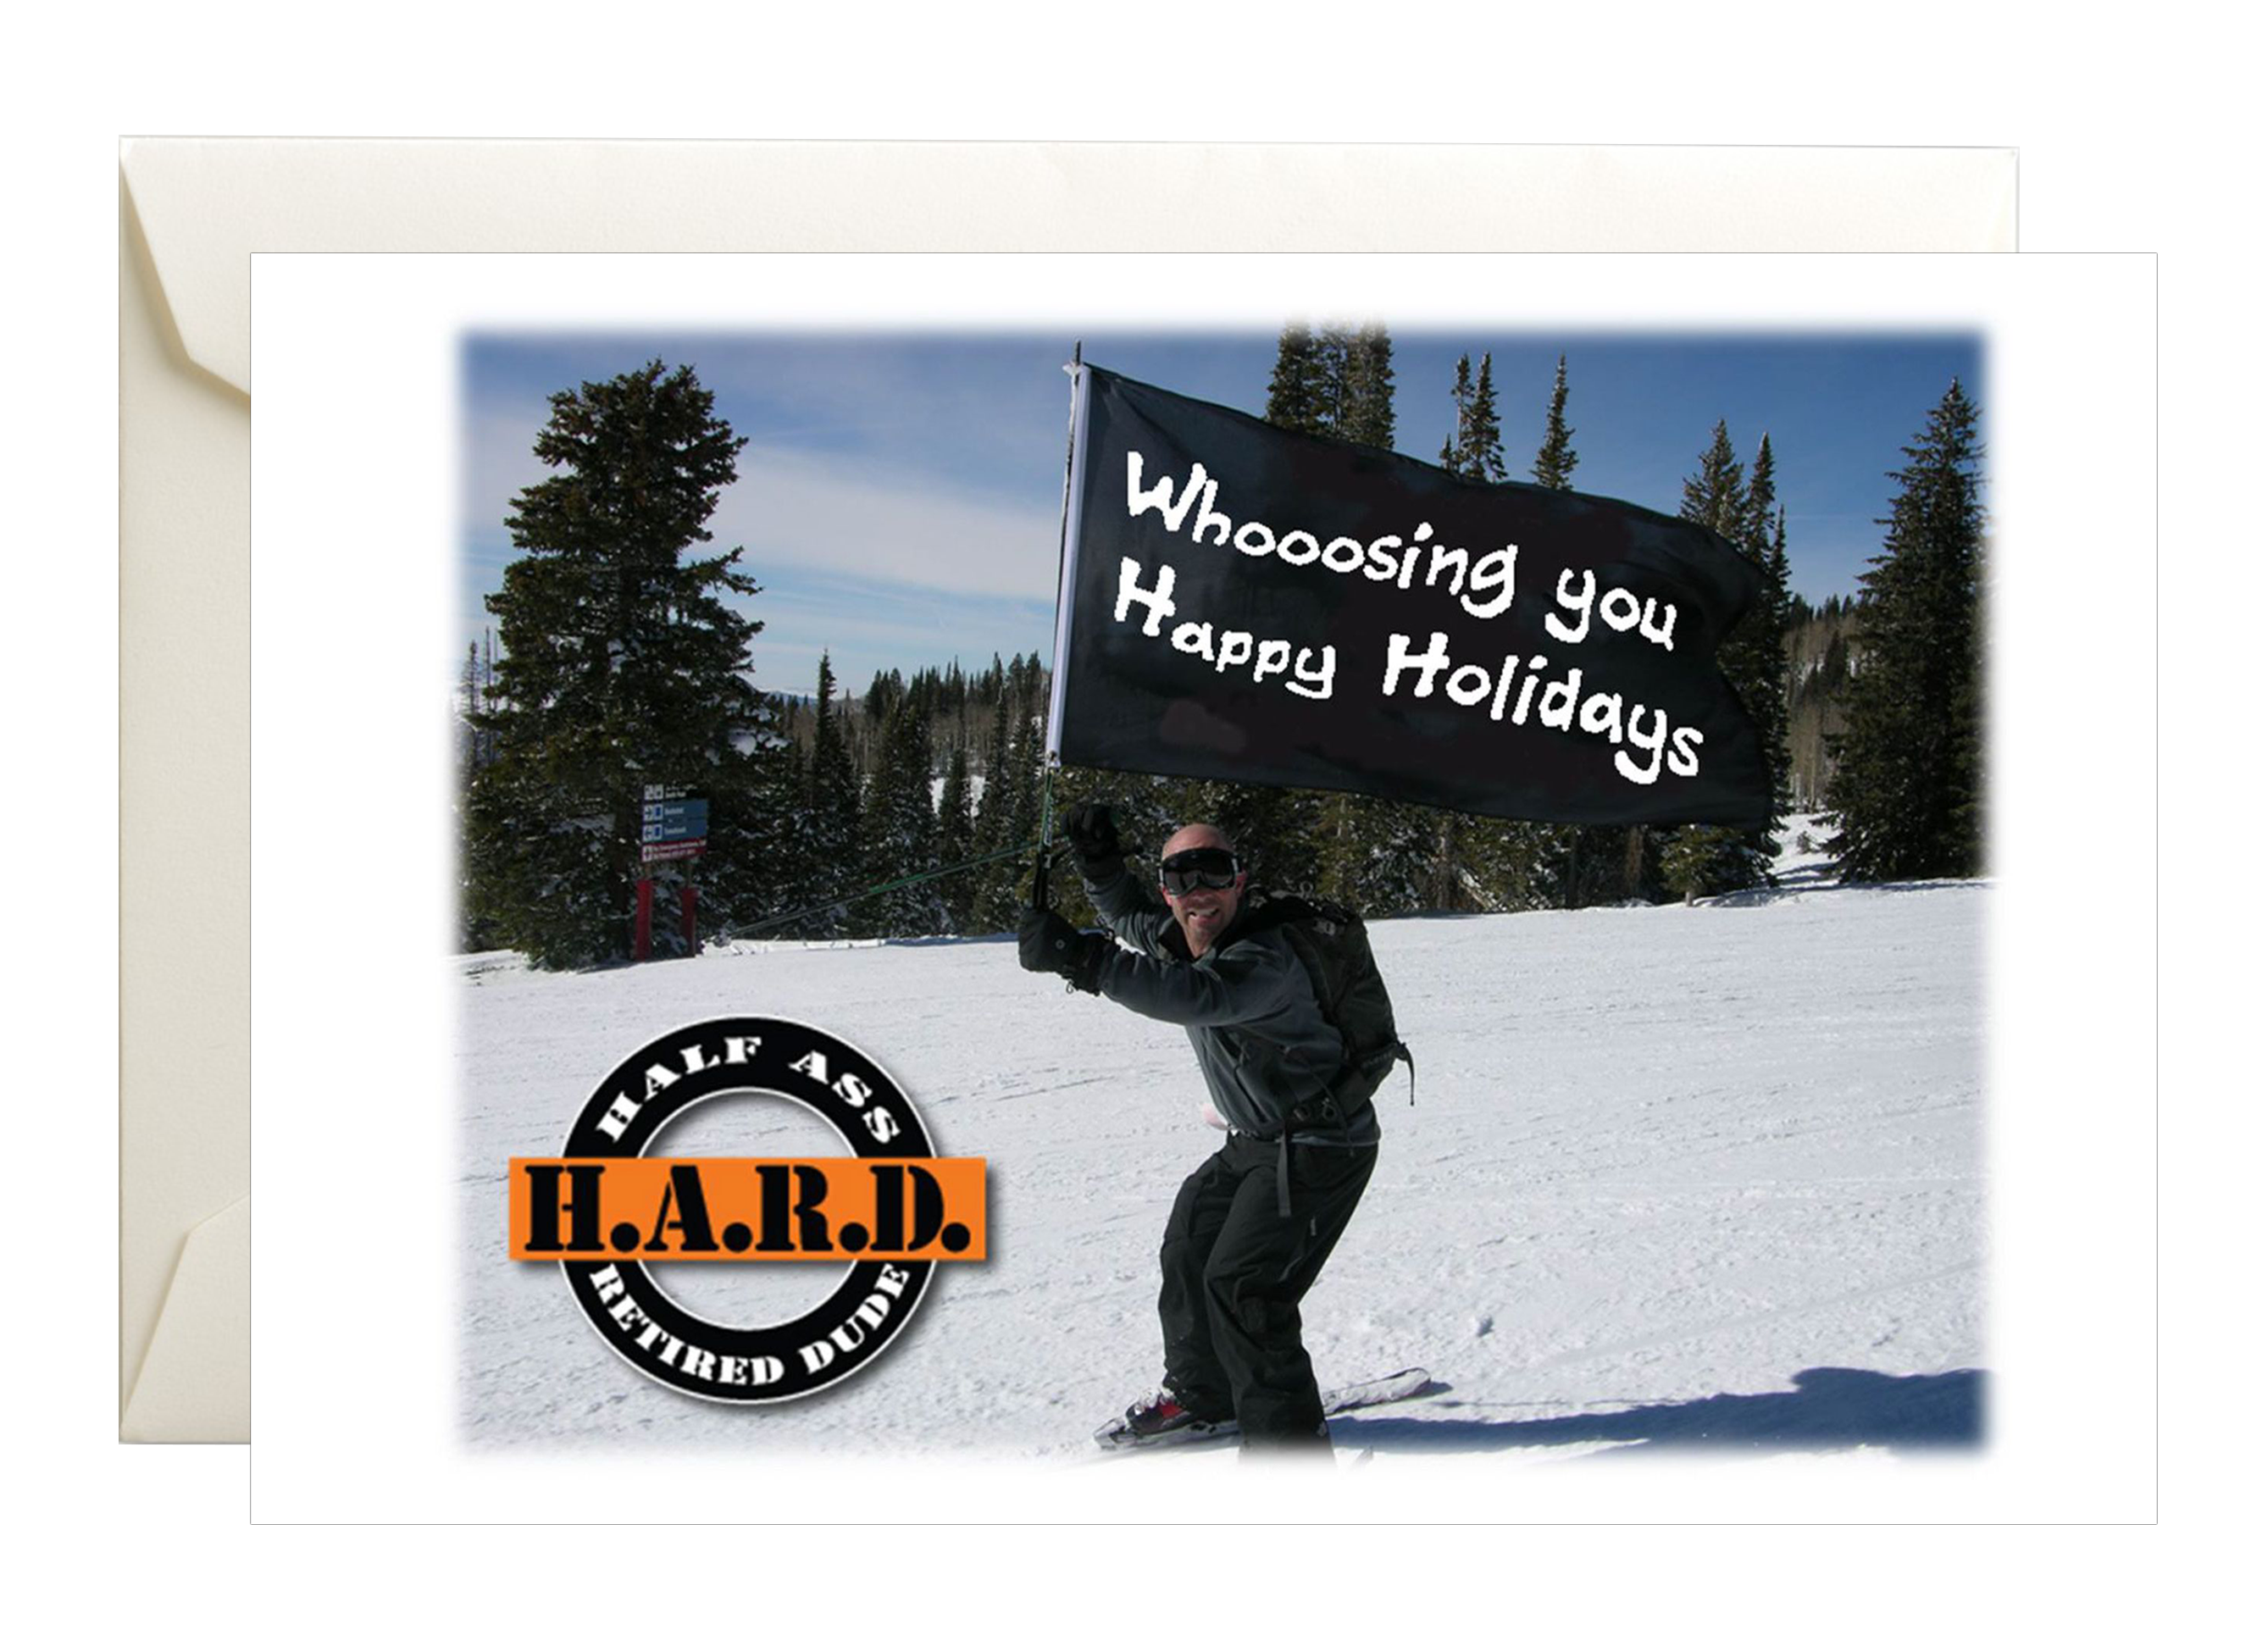 Image of guy skiing with flag that says Whoosing you happy holiday's